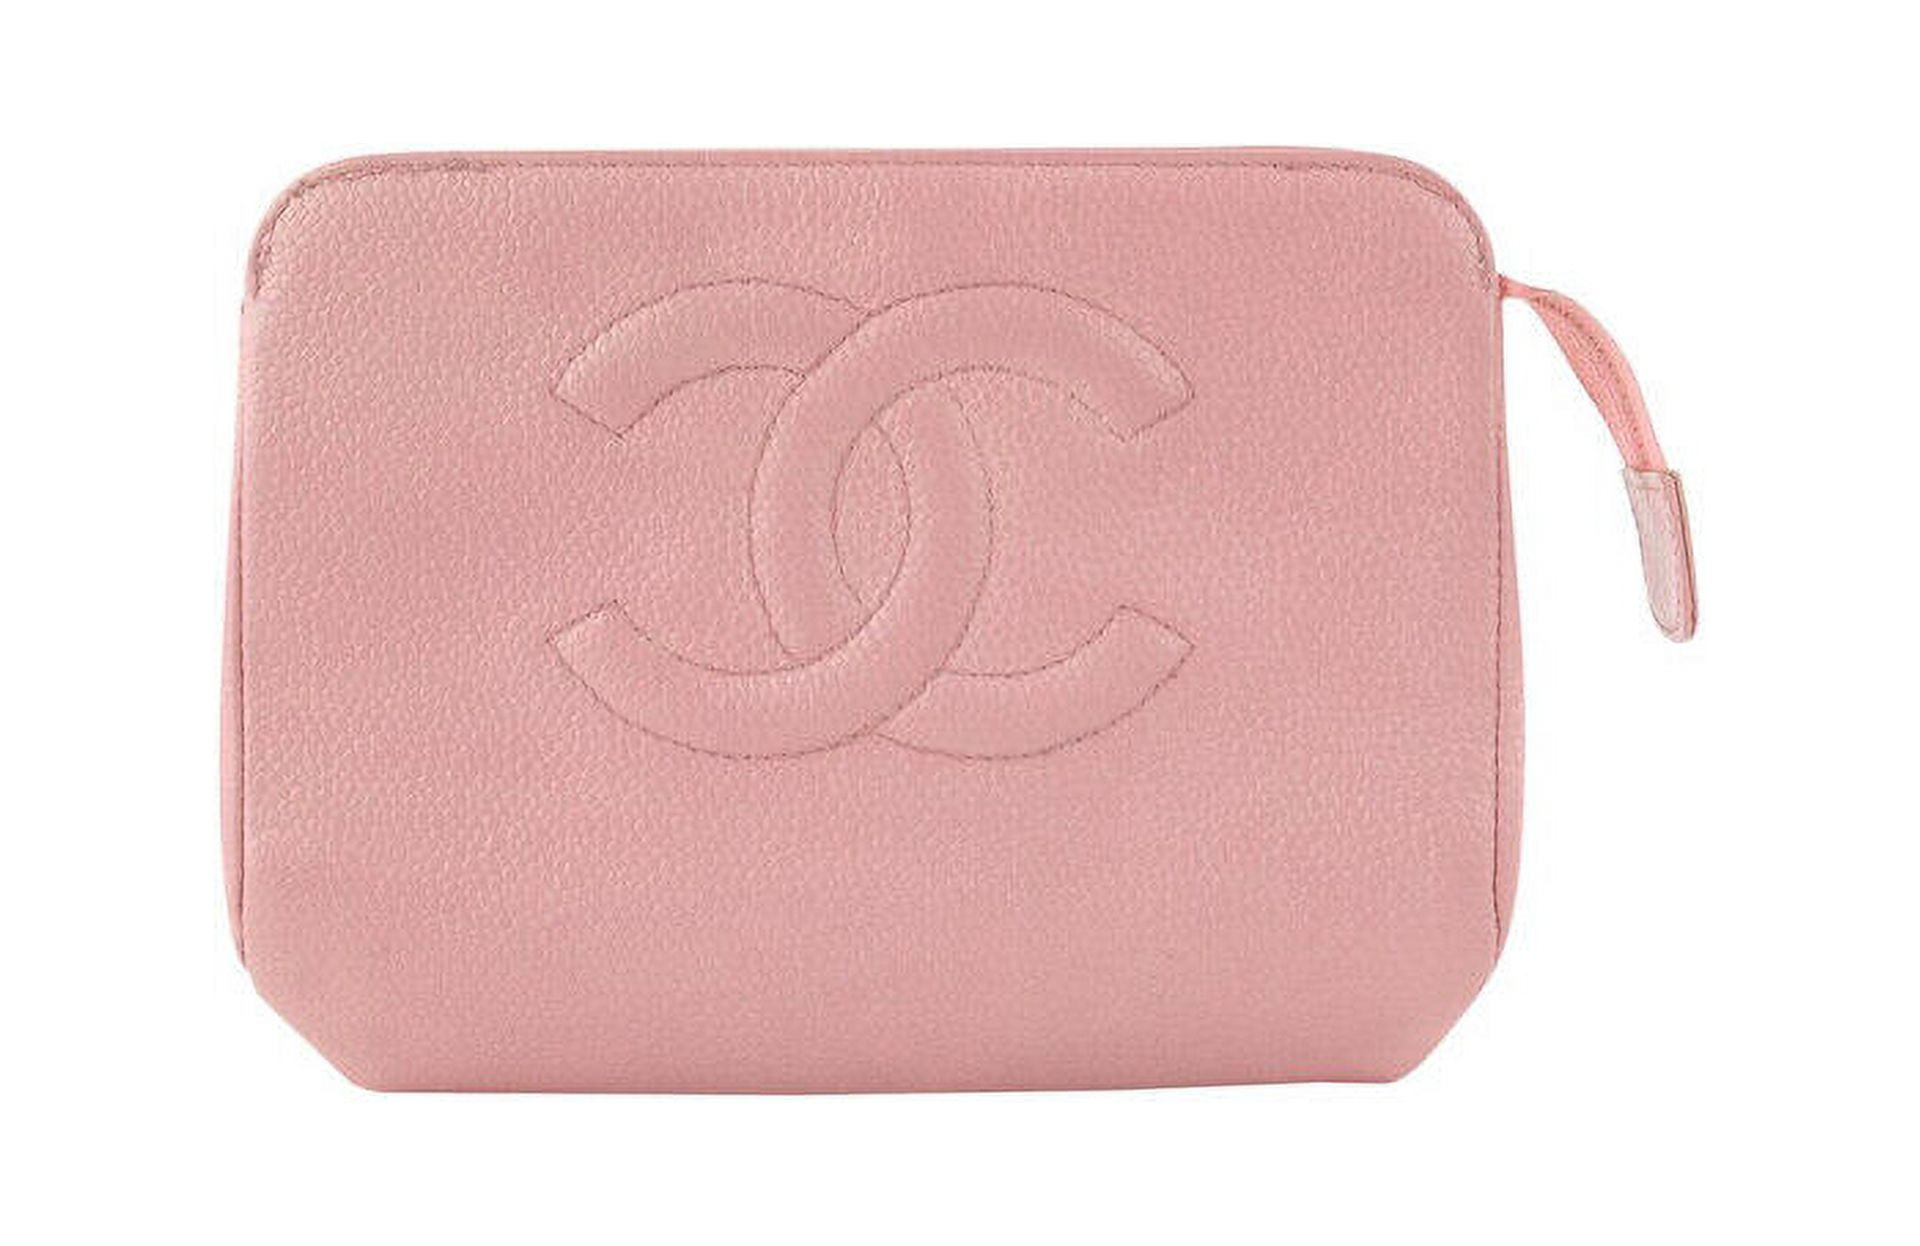 Chanel Pink Caviar Leather Cosmetic Pouch Toiletry Bag 18C712W